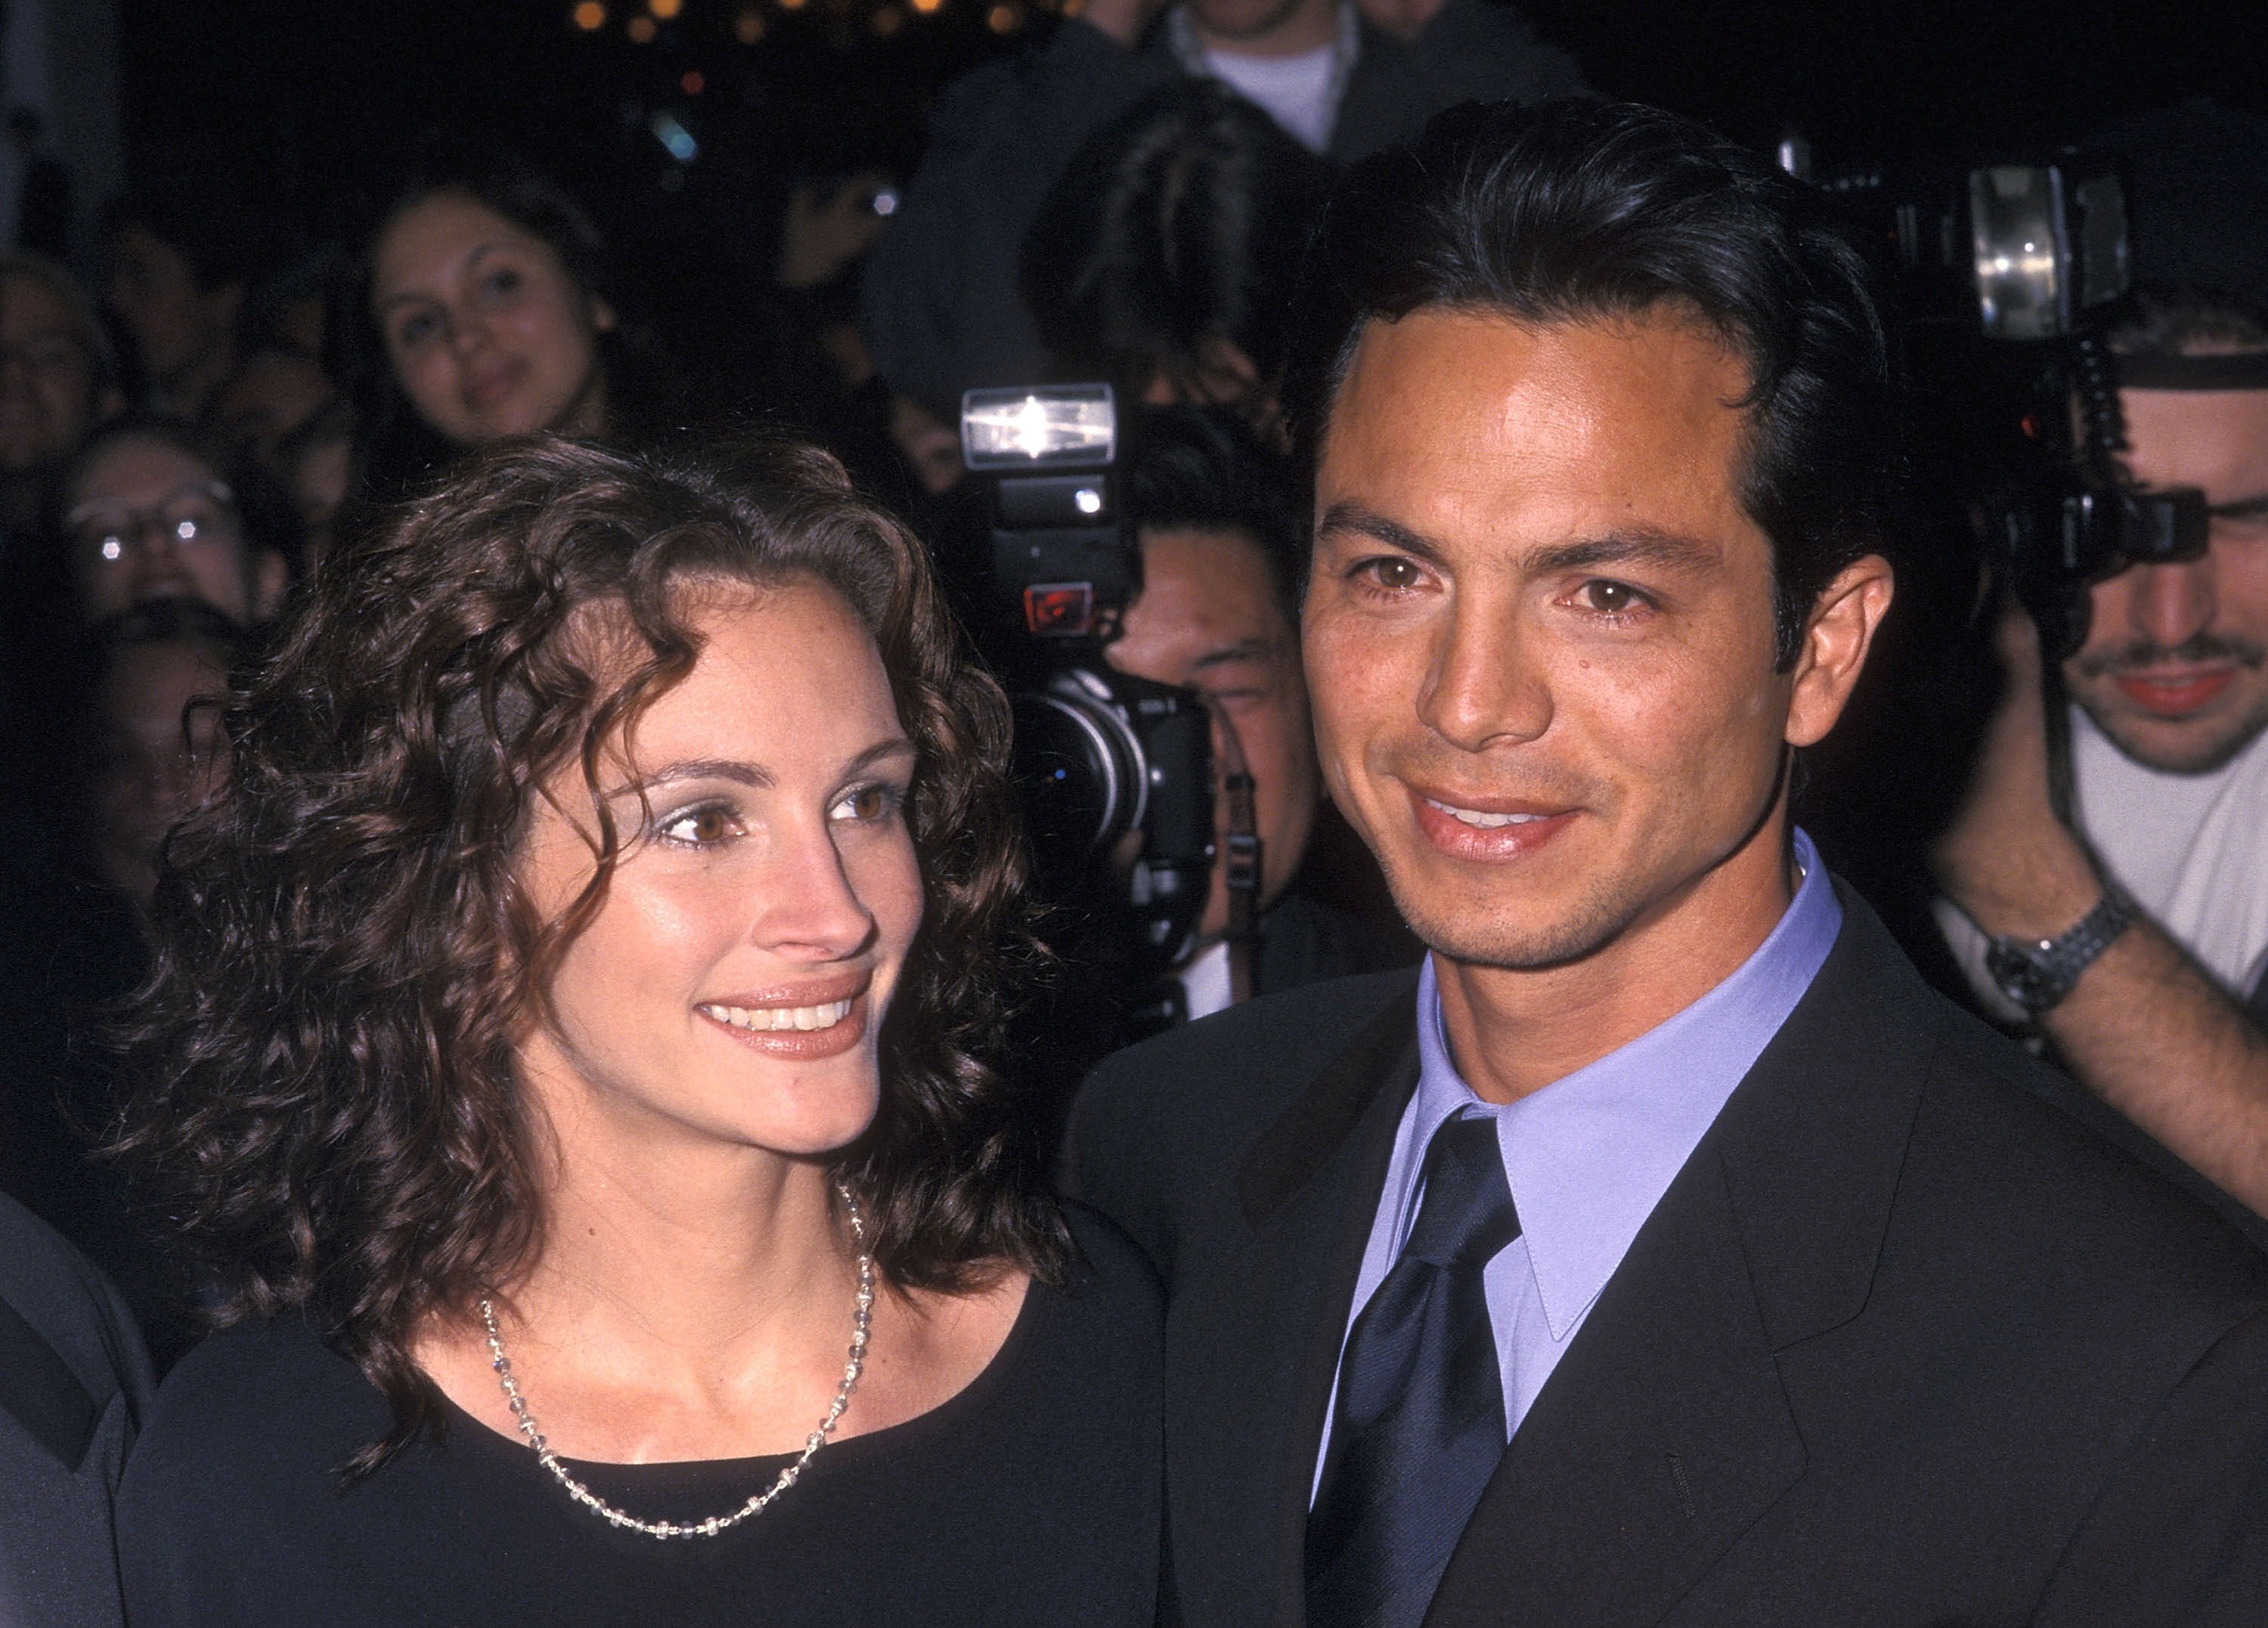 Actress Julia Roberts and actor Benjamin Bratt attend the 'Notting Hill' New York City Premiere on May 13, 1999 at the Ziegfeld Theater in New York City | Source: Getty Images